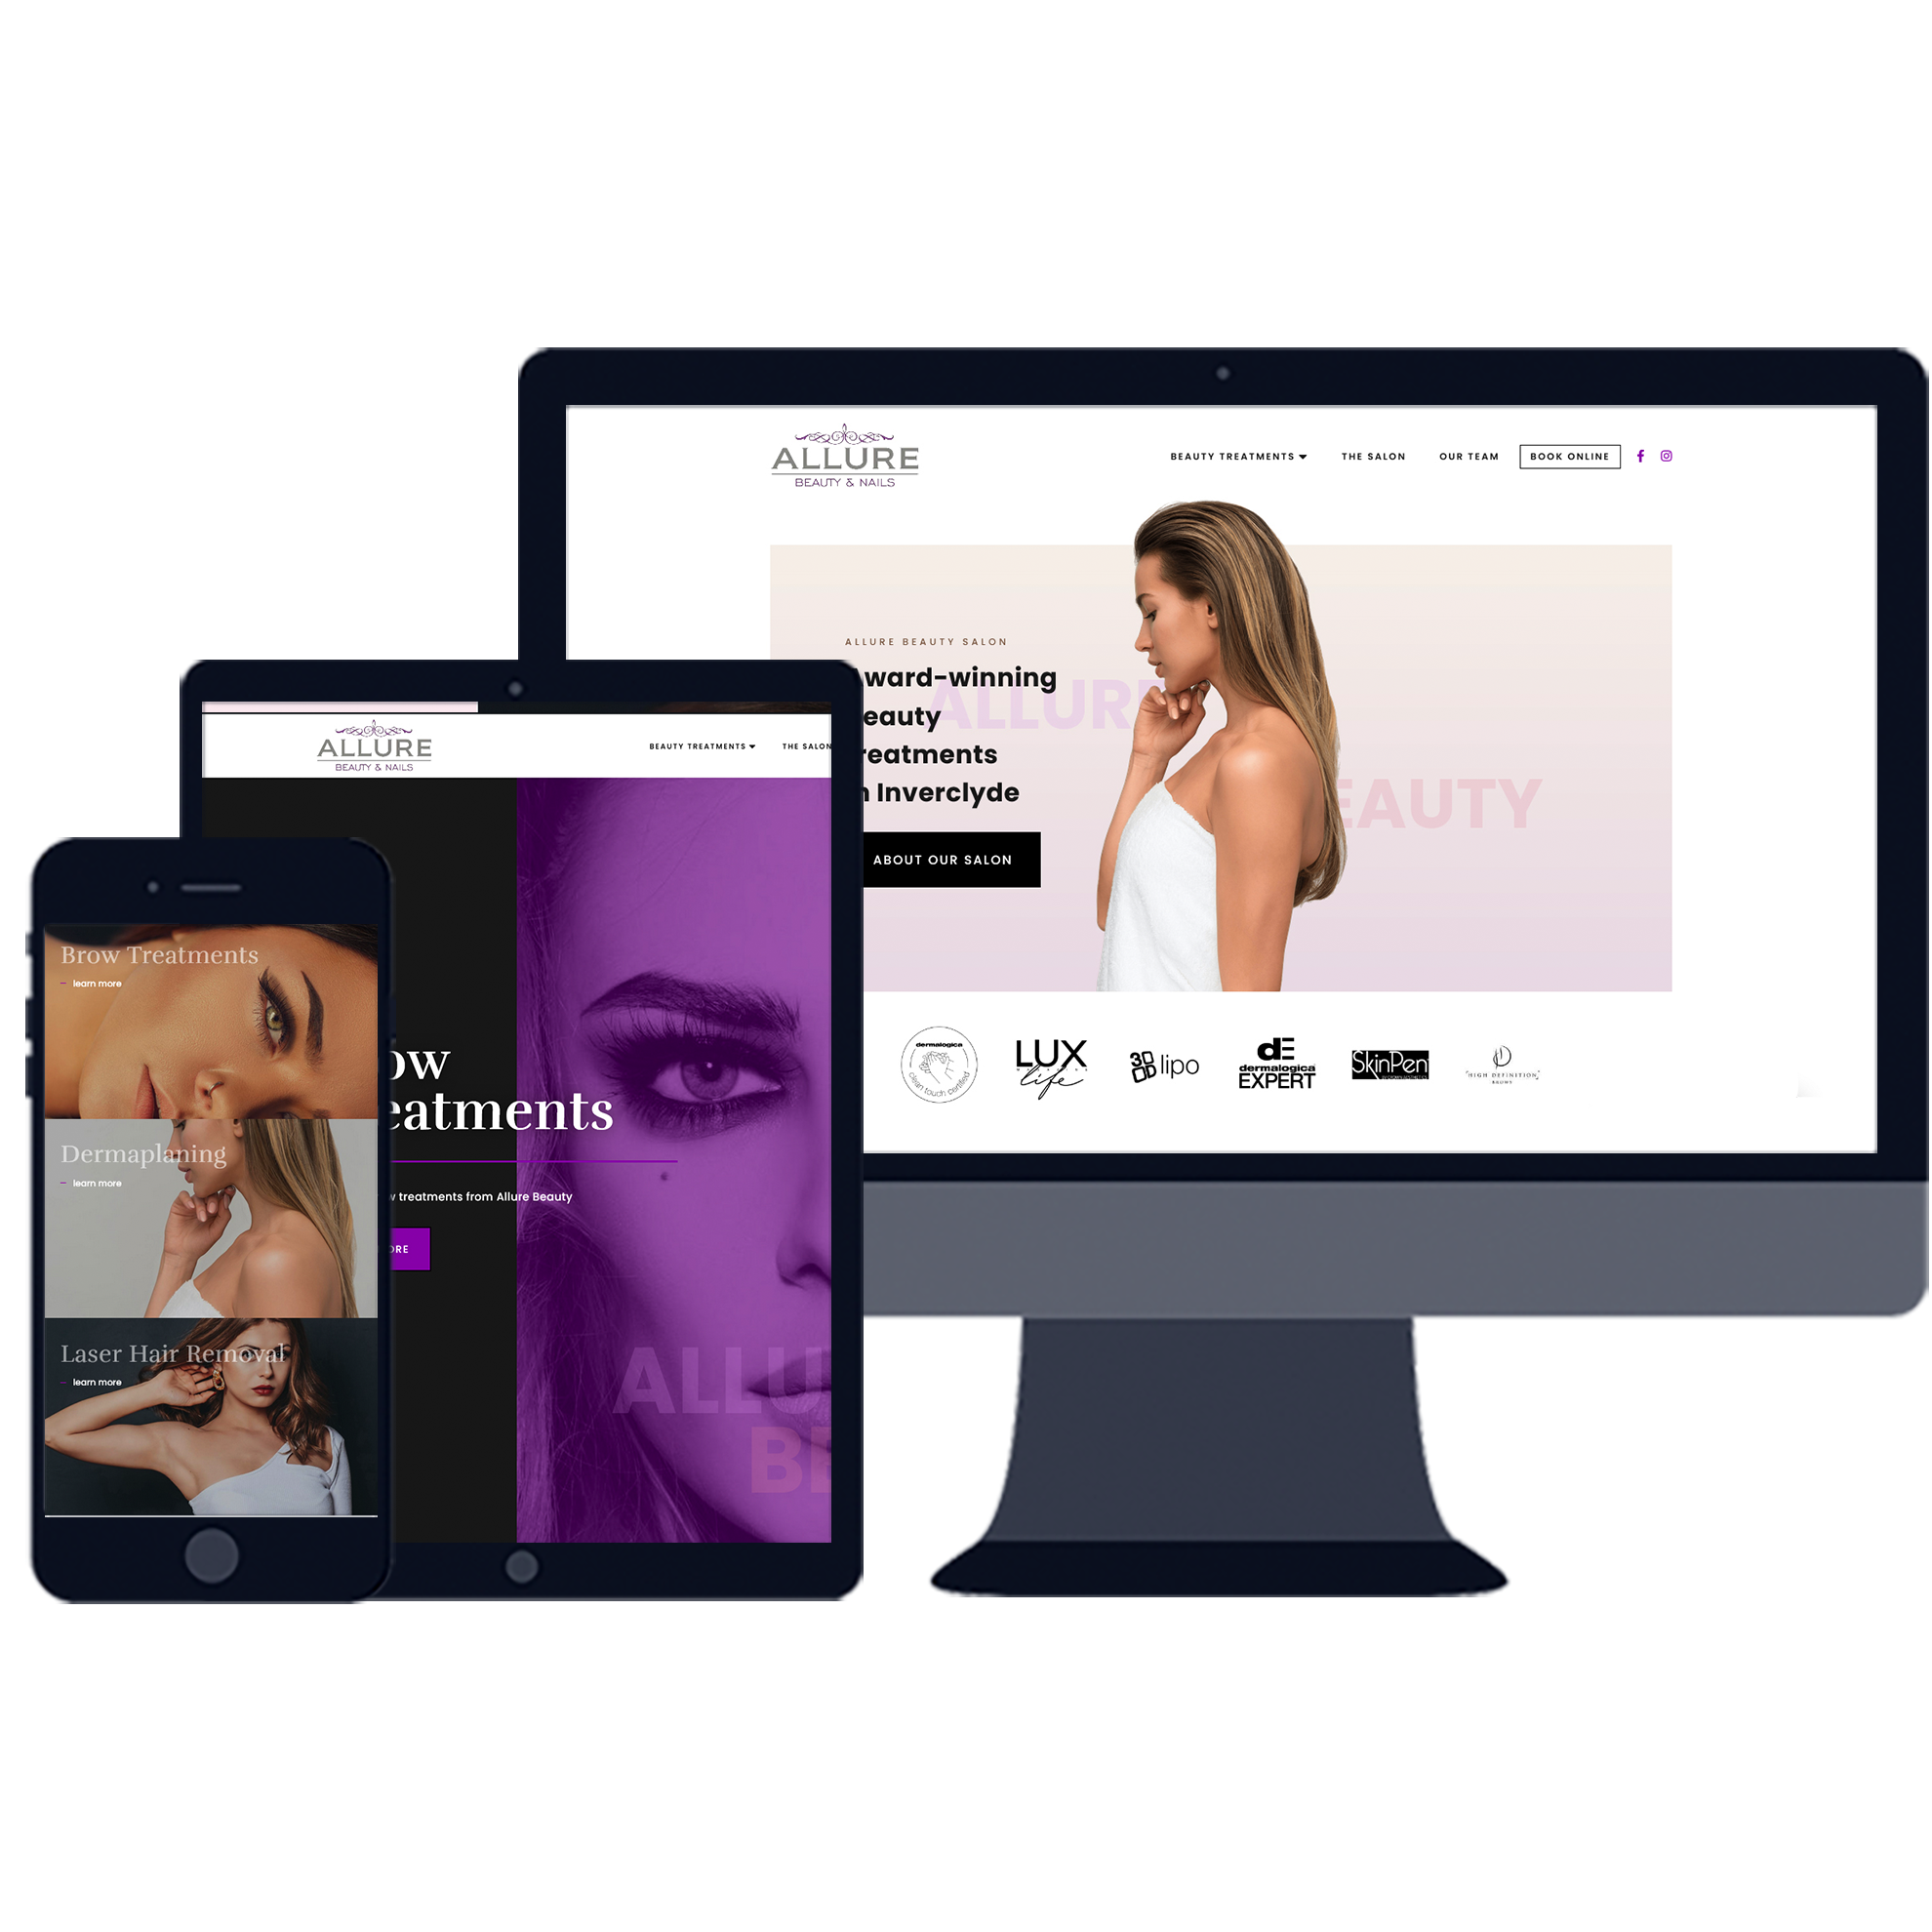 mobile booking website design for beauty salons